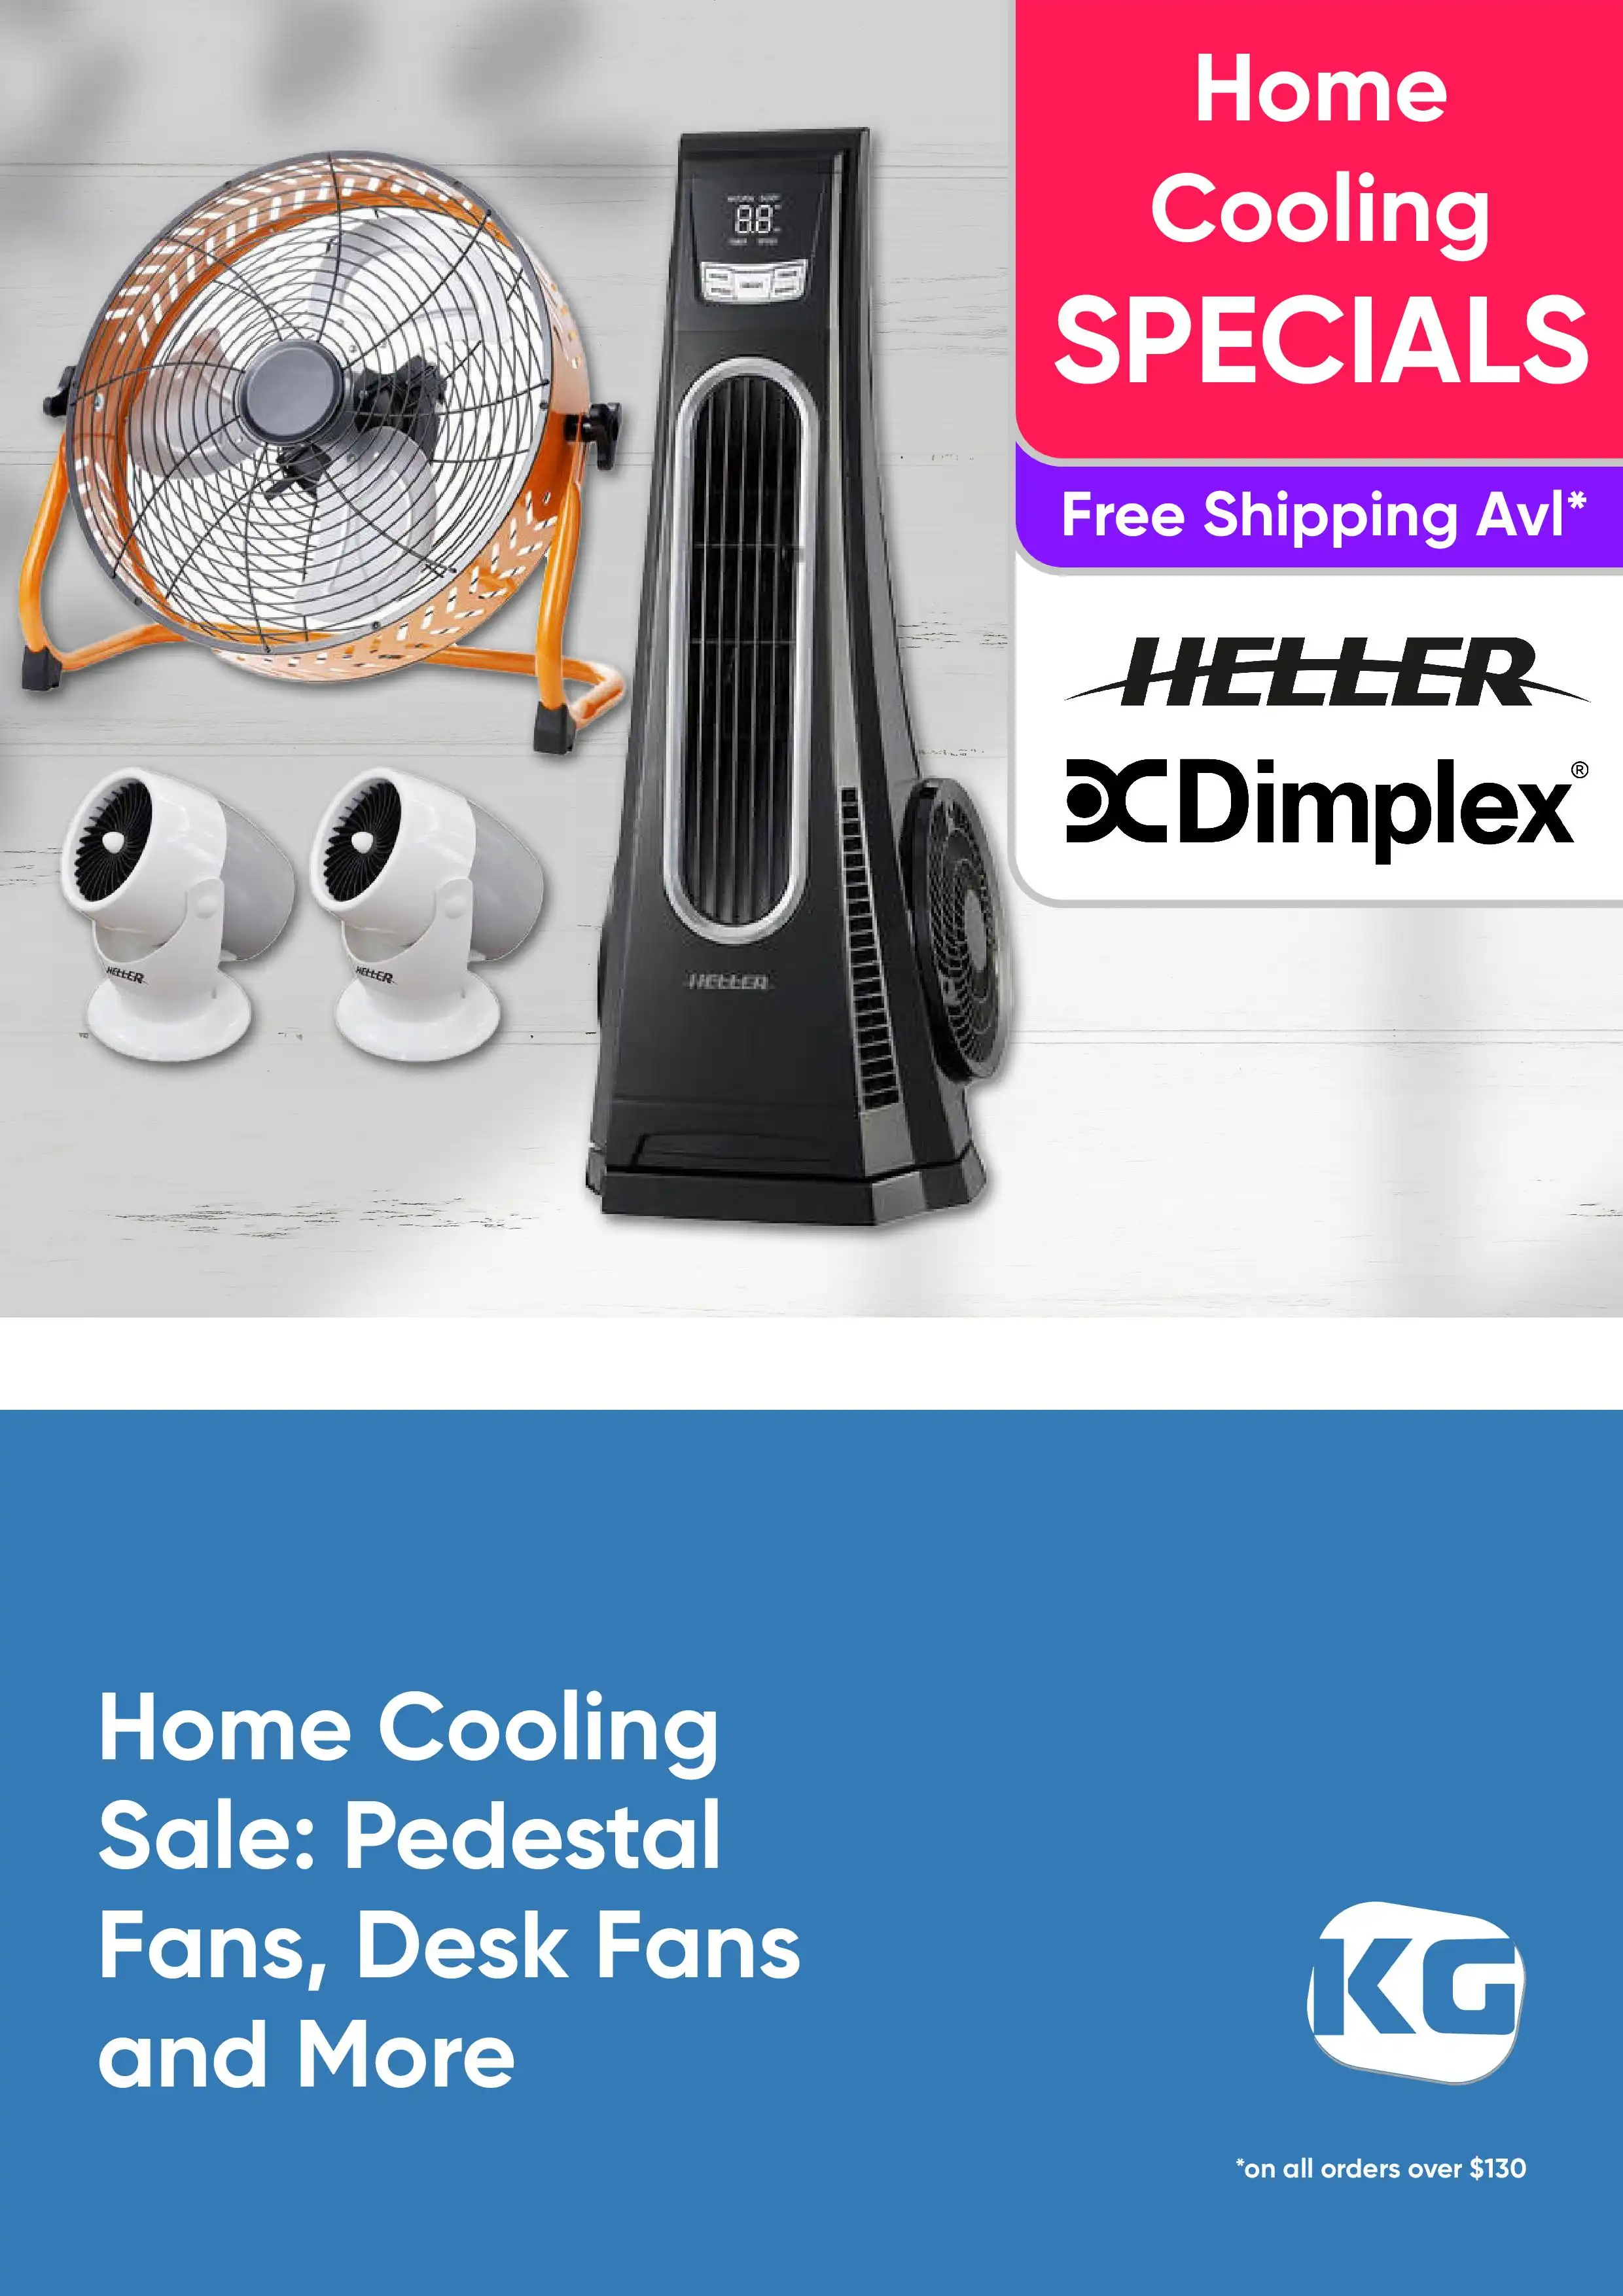 Cooling Deals for the Home